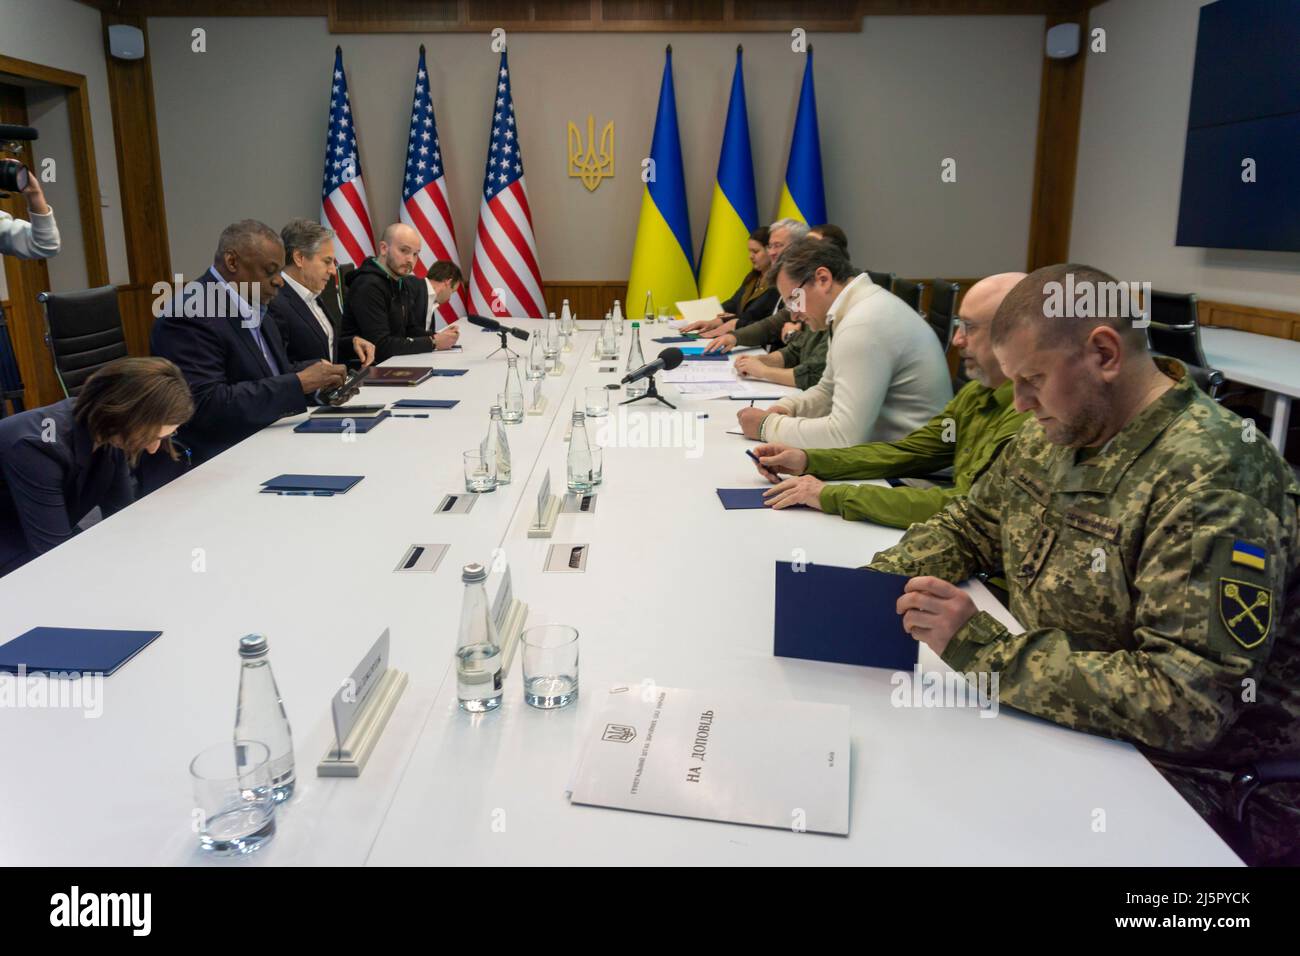 Kyiv, Ukraine. 24th Apr, 2022. Ukrainian President Volodymyr Zelenskyy, right, hosts a face-to-face meeting with U.S. Secretary of State Tony Blinken and U.S. Secretary of Defense Lloyd Austin, left, April 24, 2022 in Kyiv, Ukraine. Austin and Blinken are the highest ranking U.S. officials to visit Kyiv since the Russian invasion. Credit: U.S. State Department/U.S. State Department/Alamy Live News Stock Photo